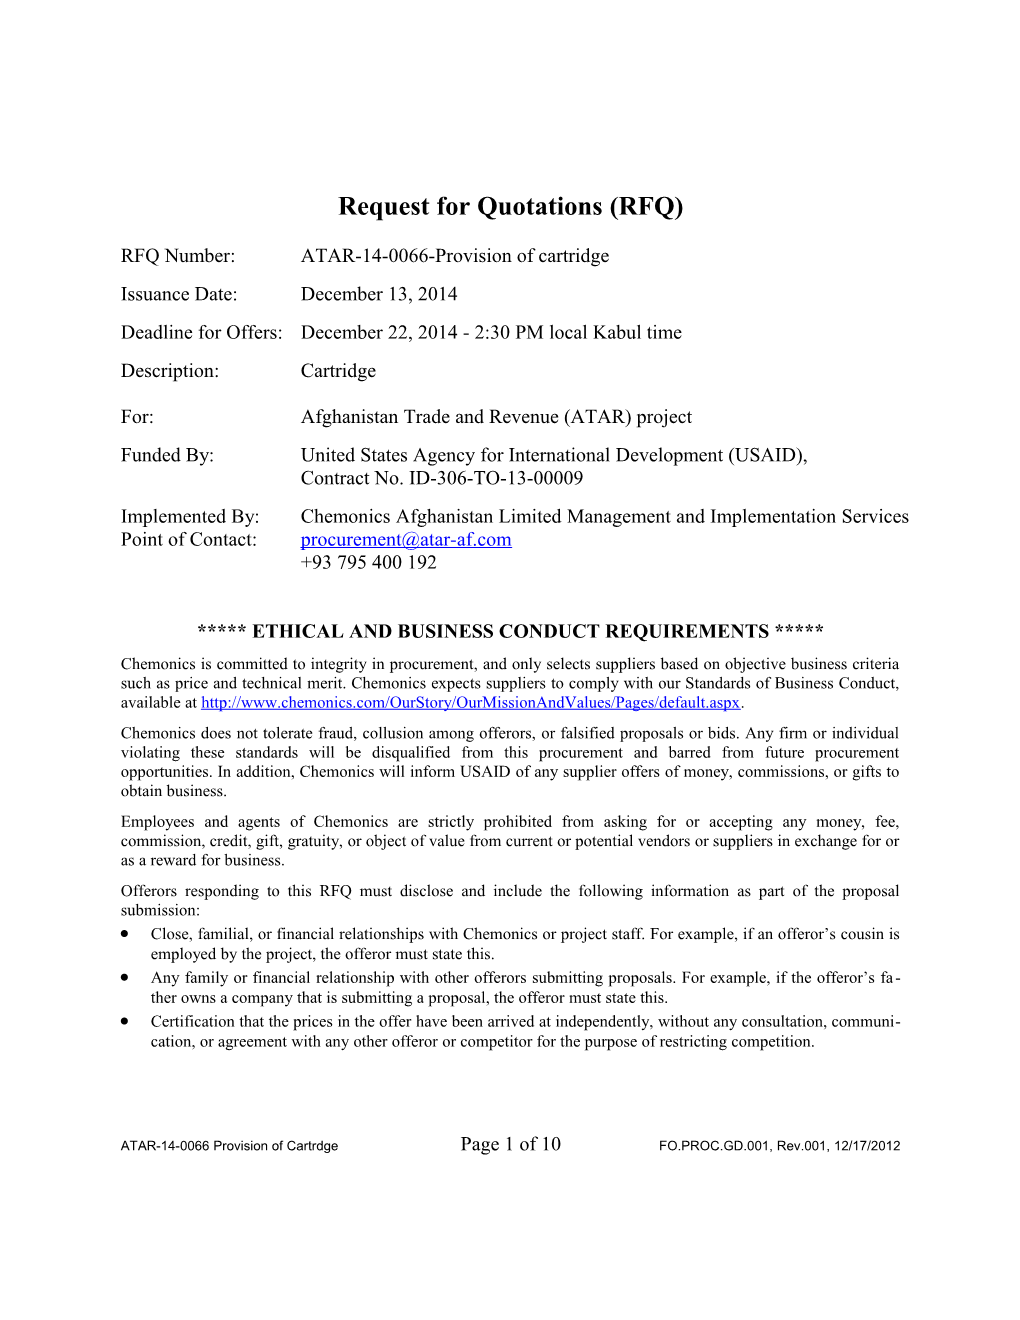 Request for Quotations (RFQ) s4